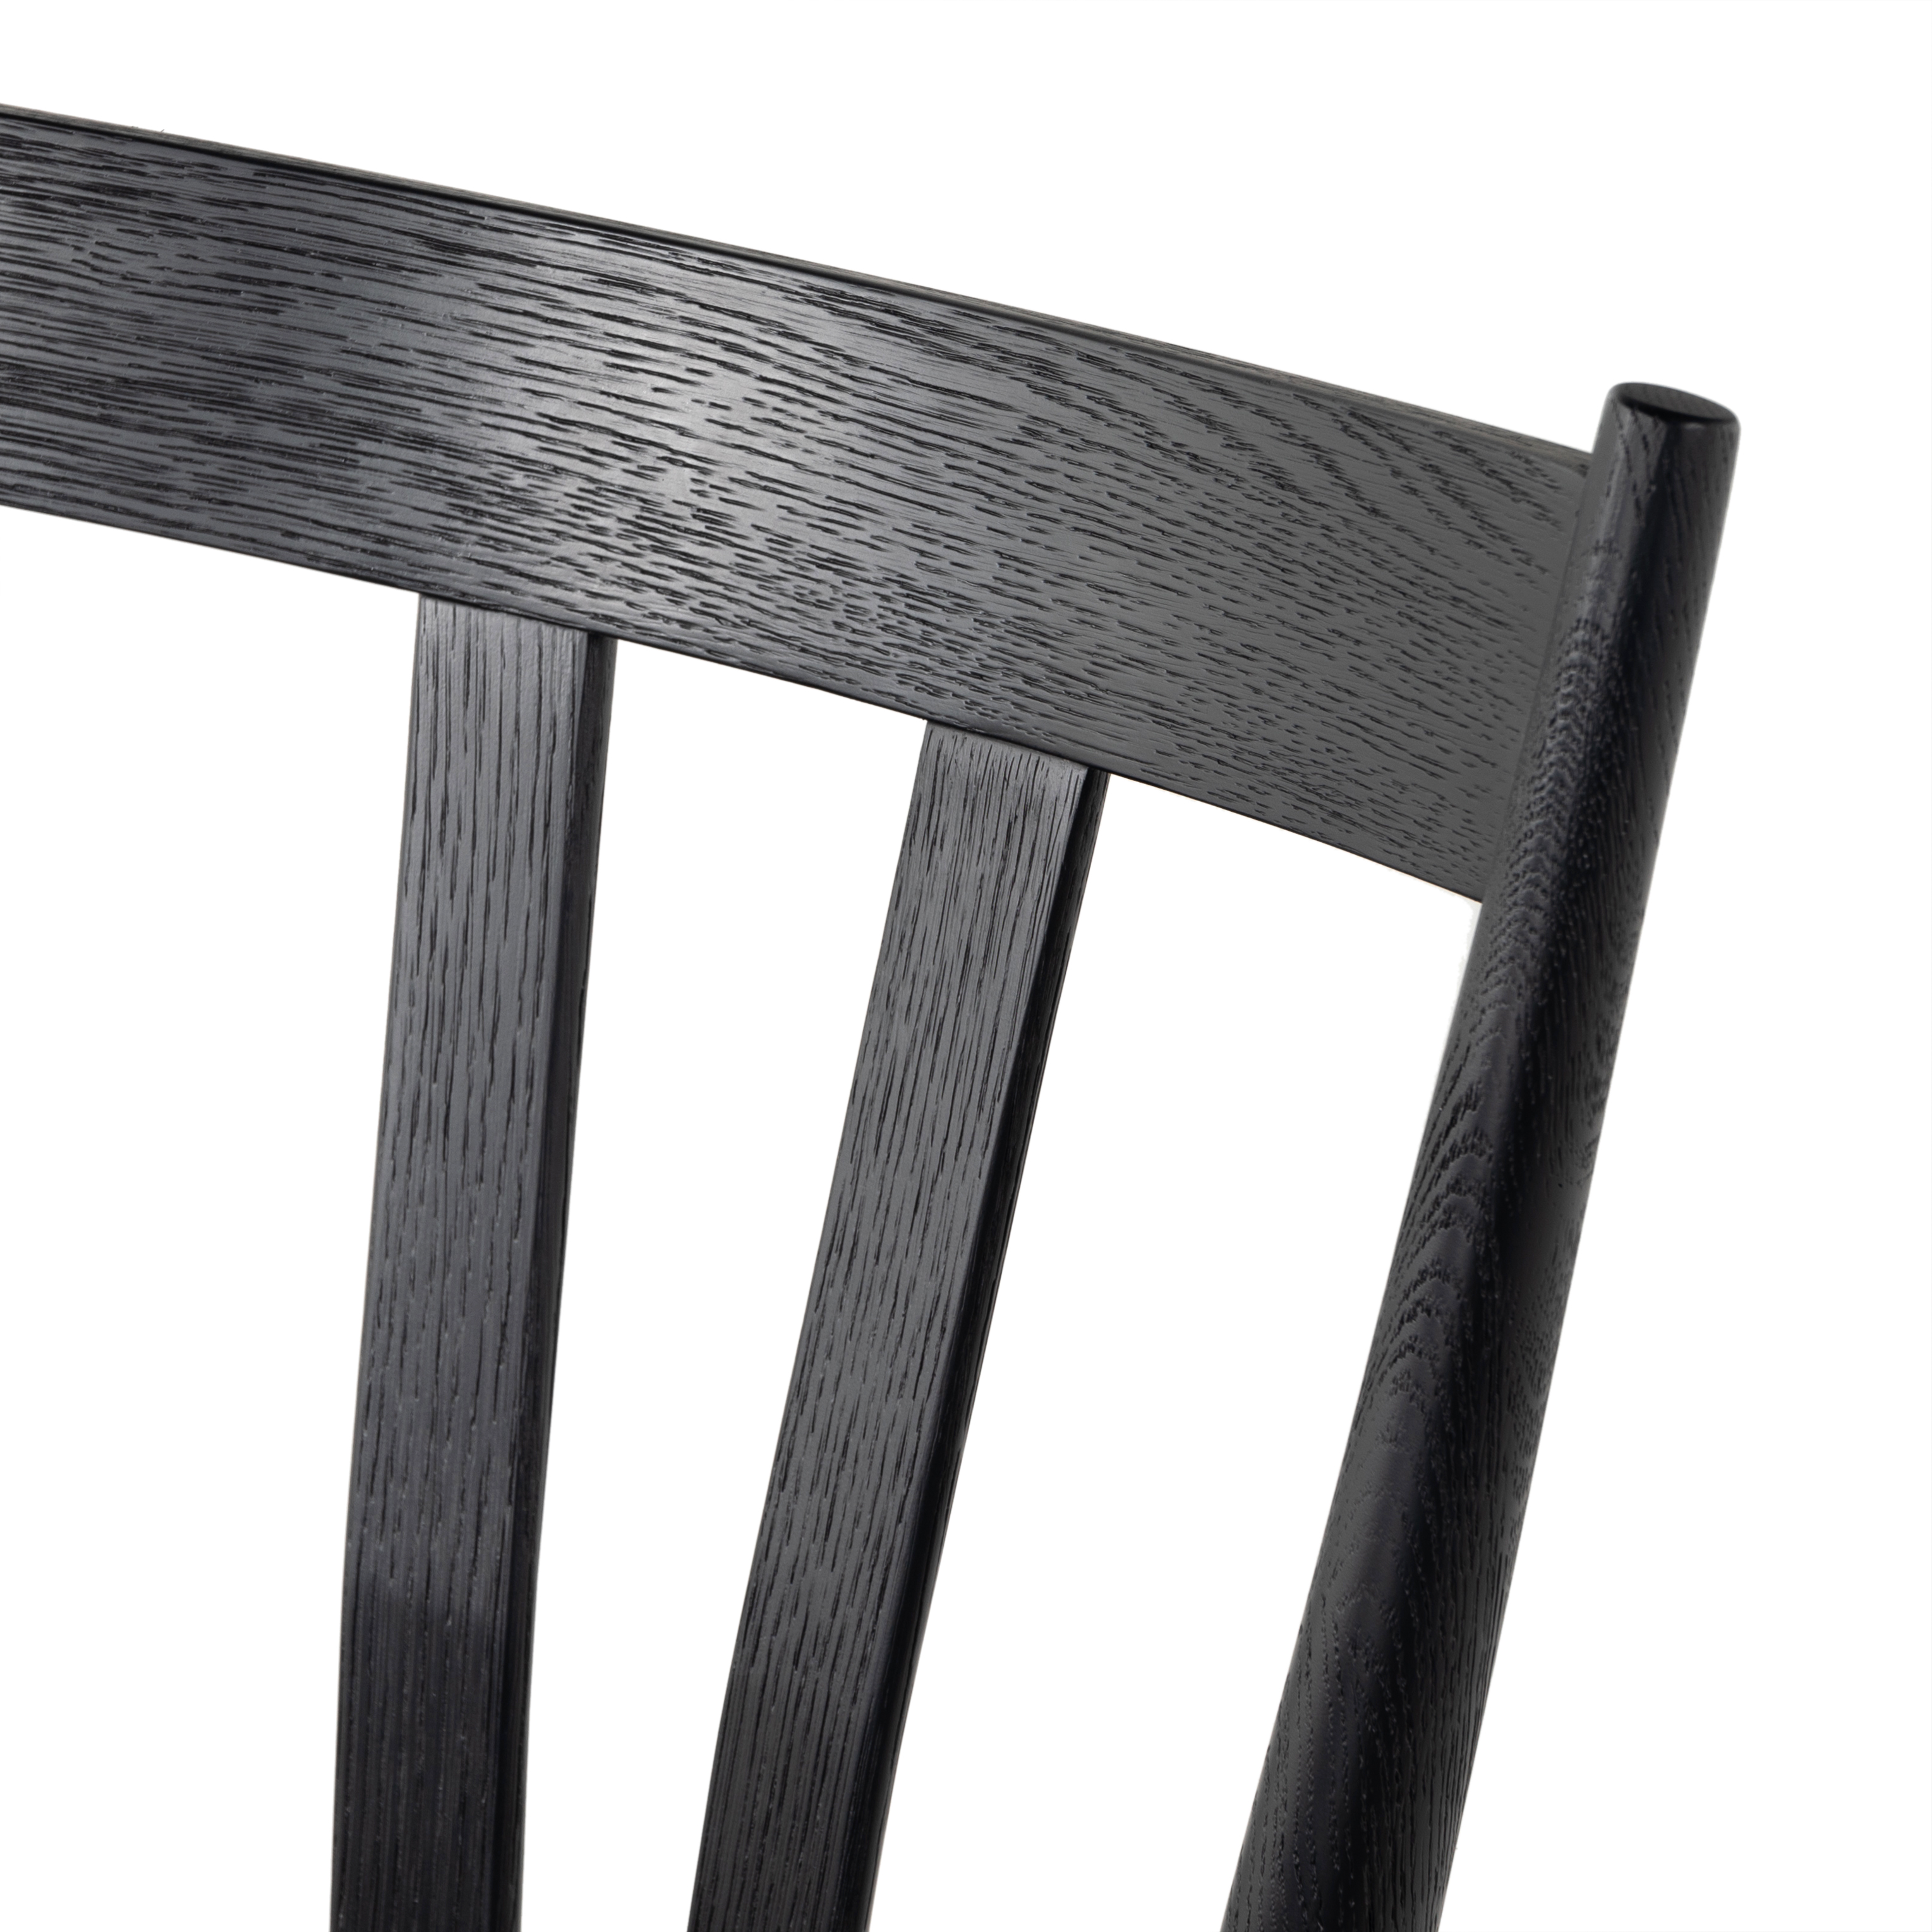 Finished in a beautifully classic black oak, the Gregory Black Oak Dining Chair features a yoke-like back and widened supports, placing a fresh twist on the traditional Windsor. Amethyst Home provides interior design, new construction, custom furniture, and rugs for the Charlotte, North Carolina metro area.